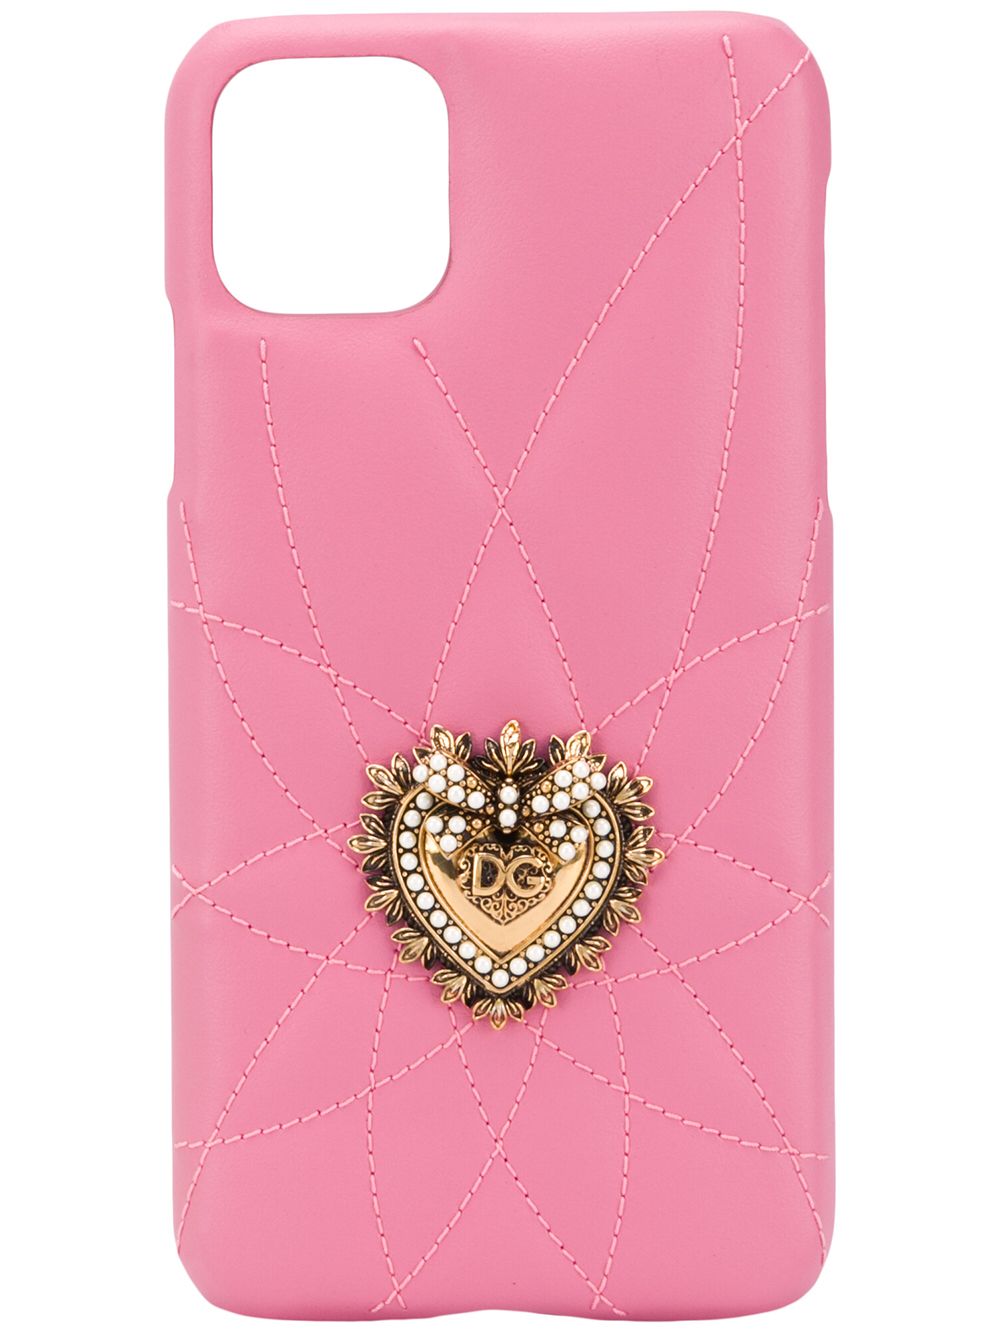 Dolce & Gabbana Heart Plaque Iphone 11 Pro Max Case In Pink